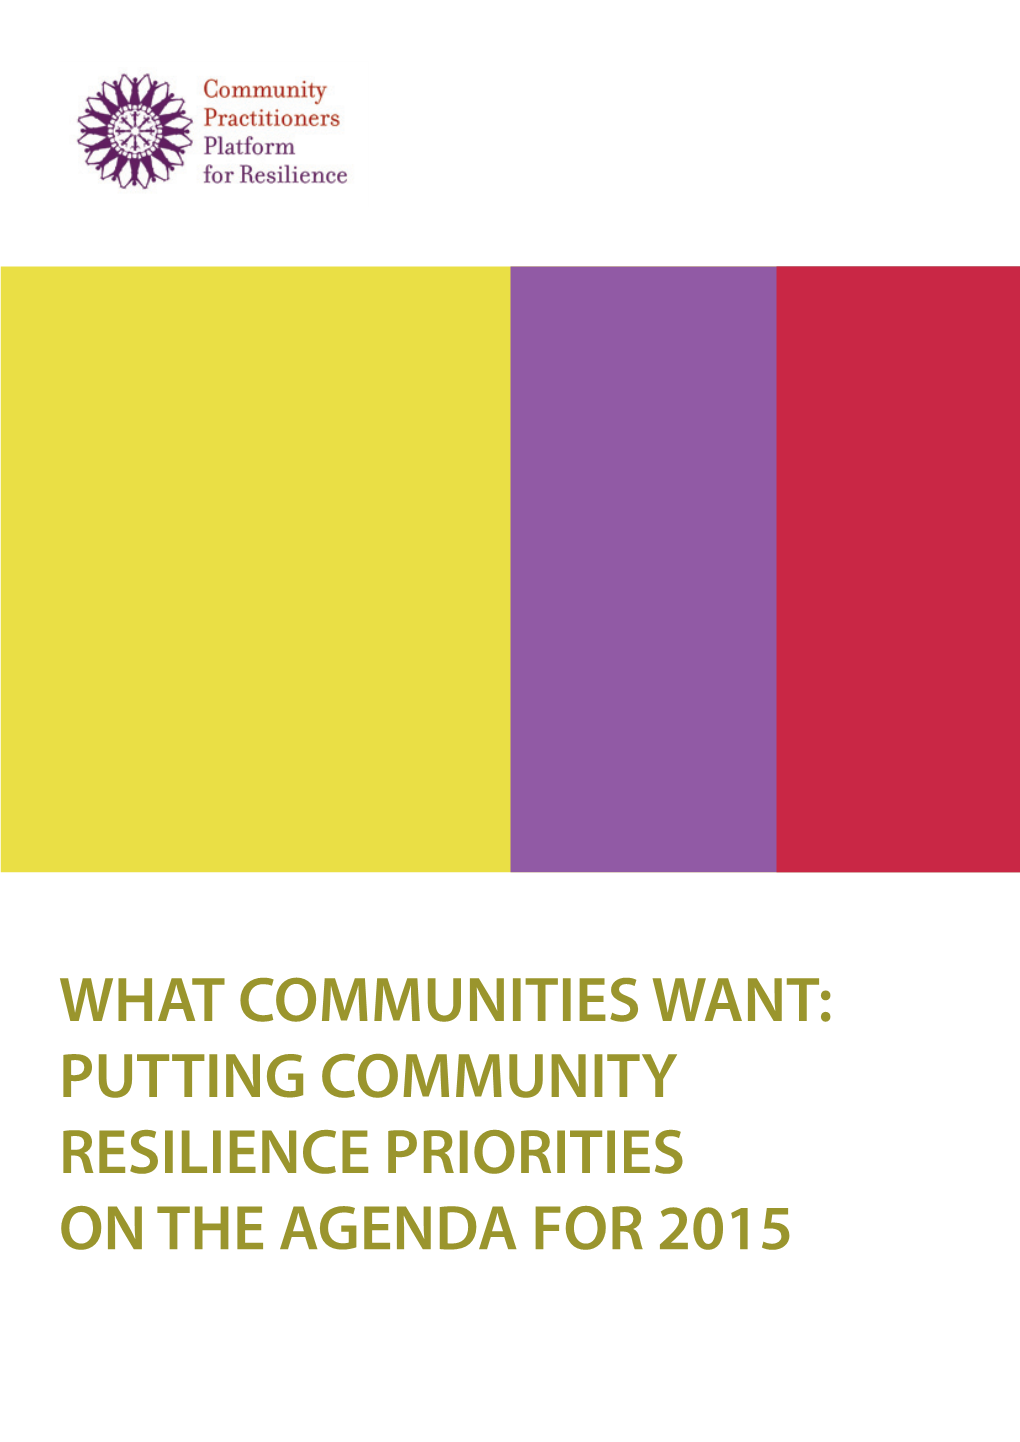 What Communities Want: Putting Community Resilience Priorities on the Agenda for 2015